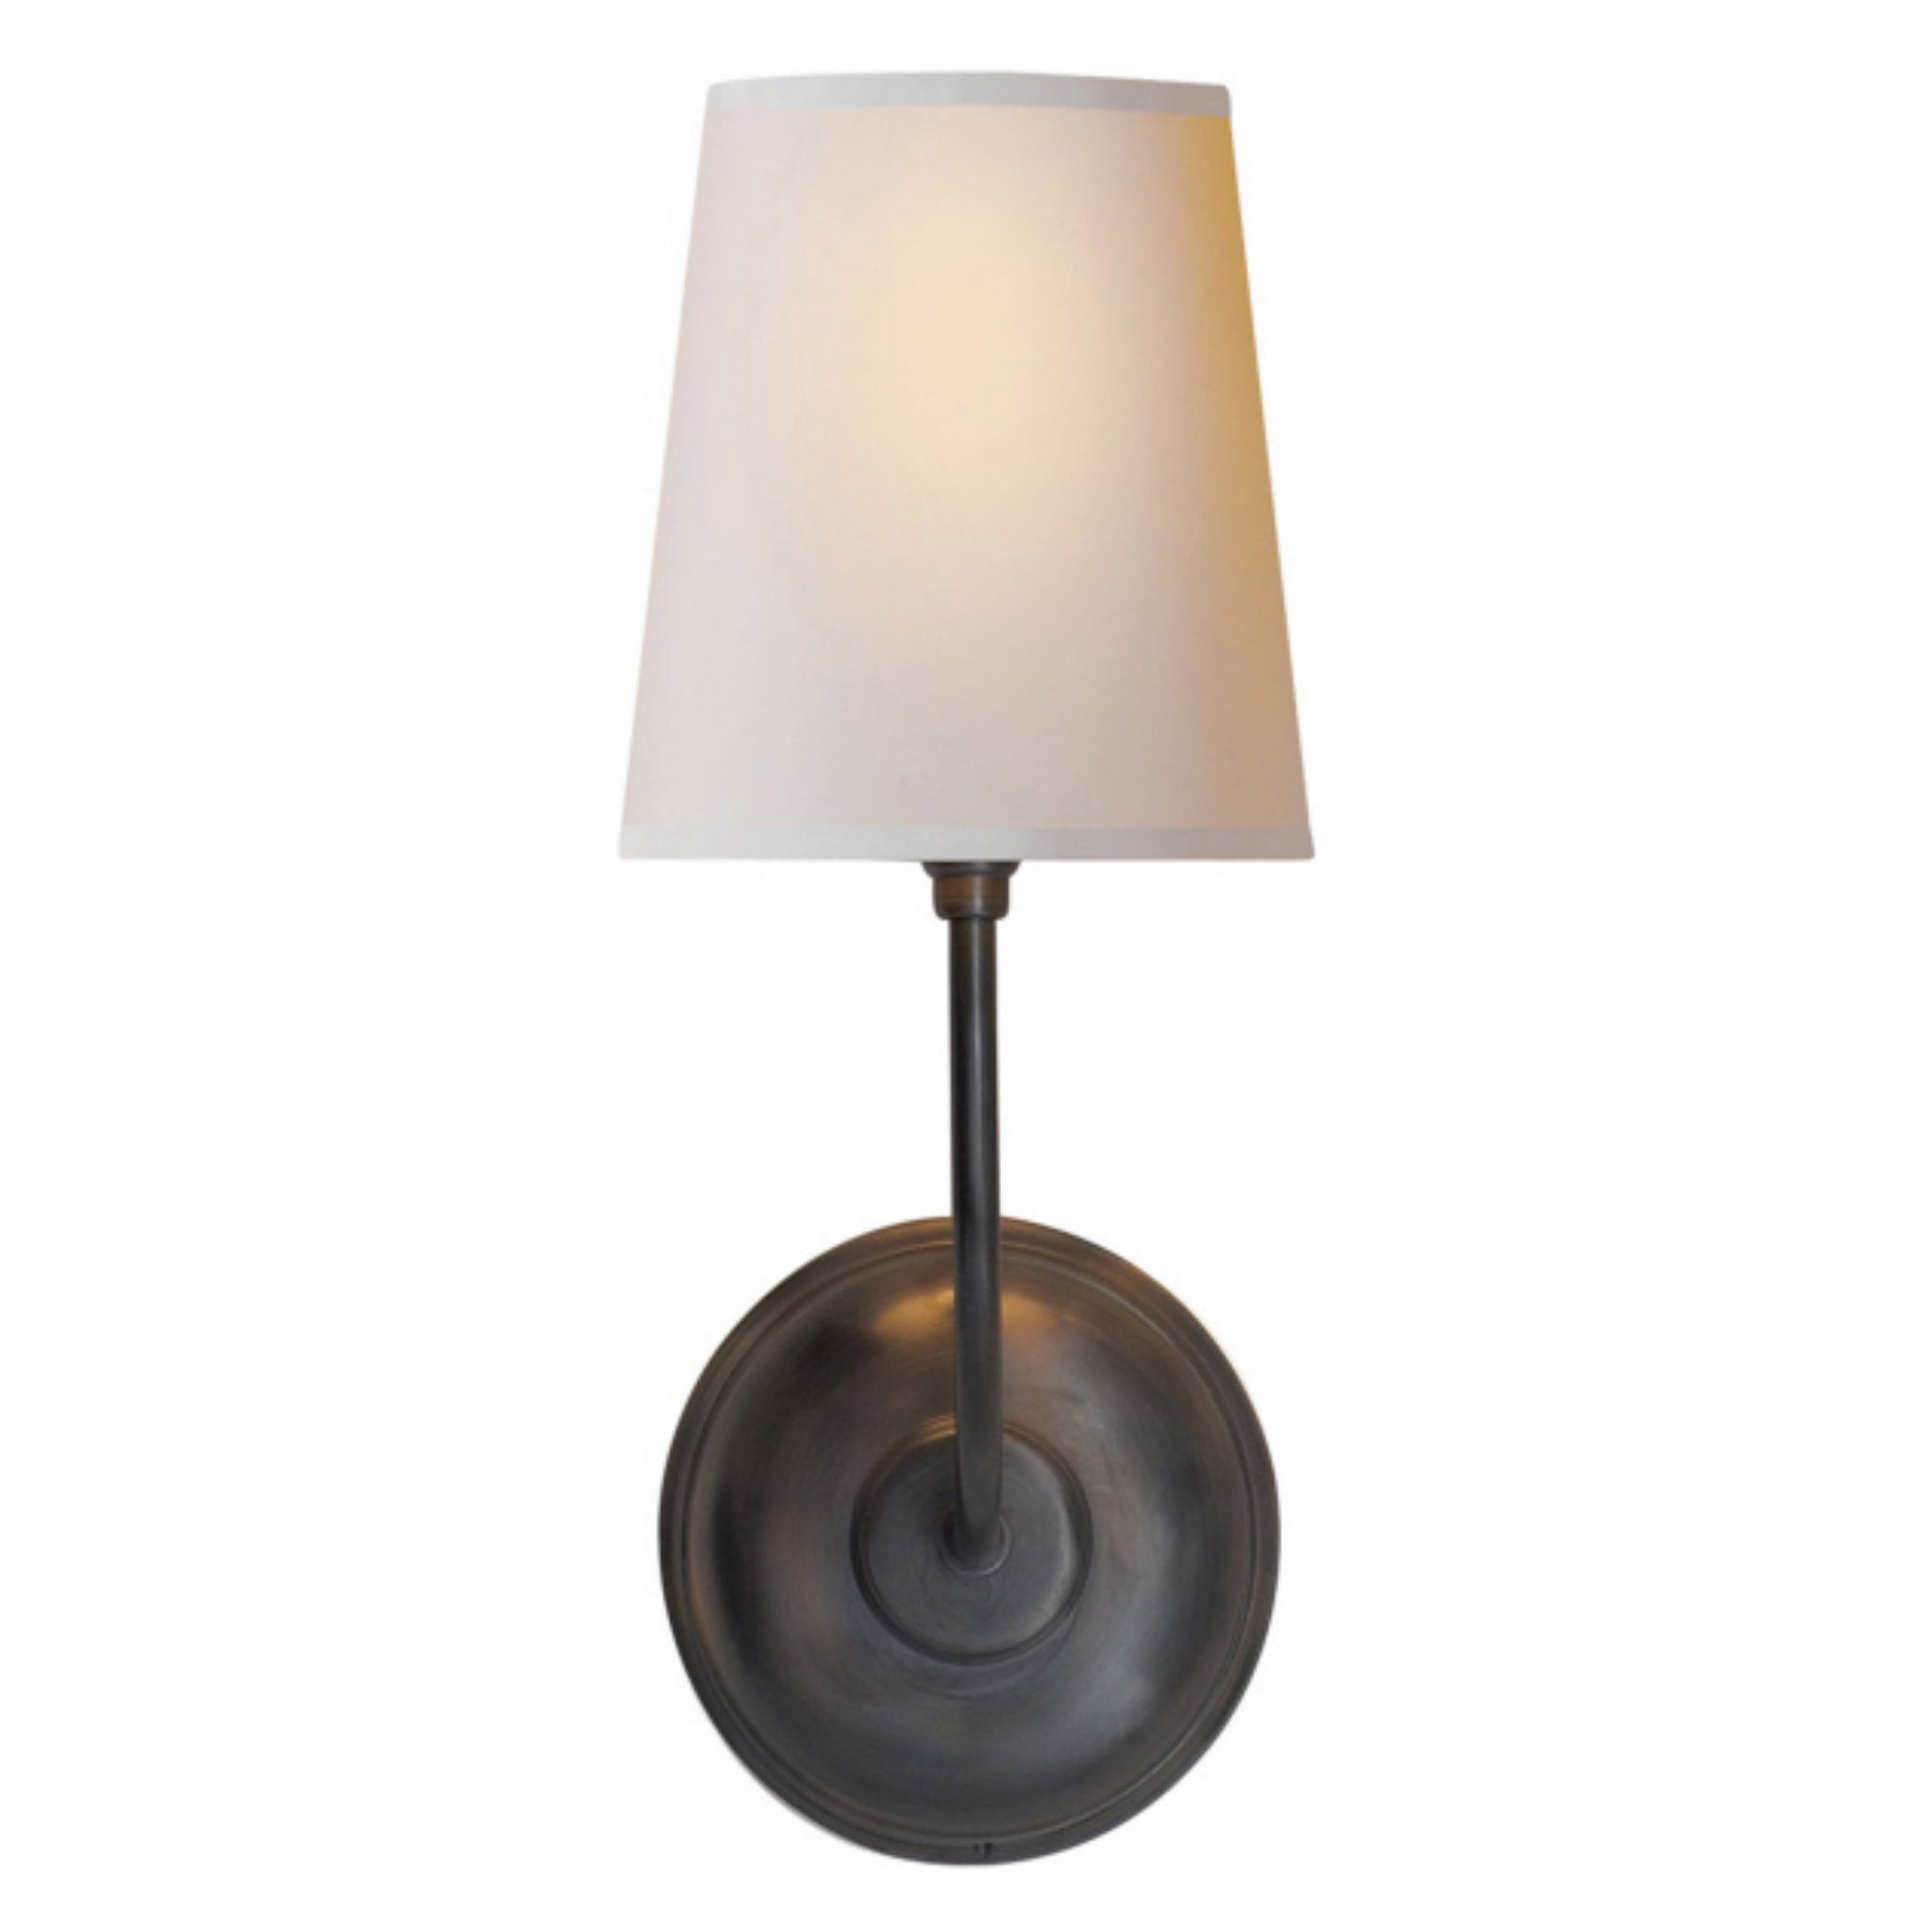 Thomas O'Brien Vendome Single Sconce in Bronze with Natural Paper Shade